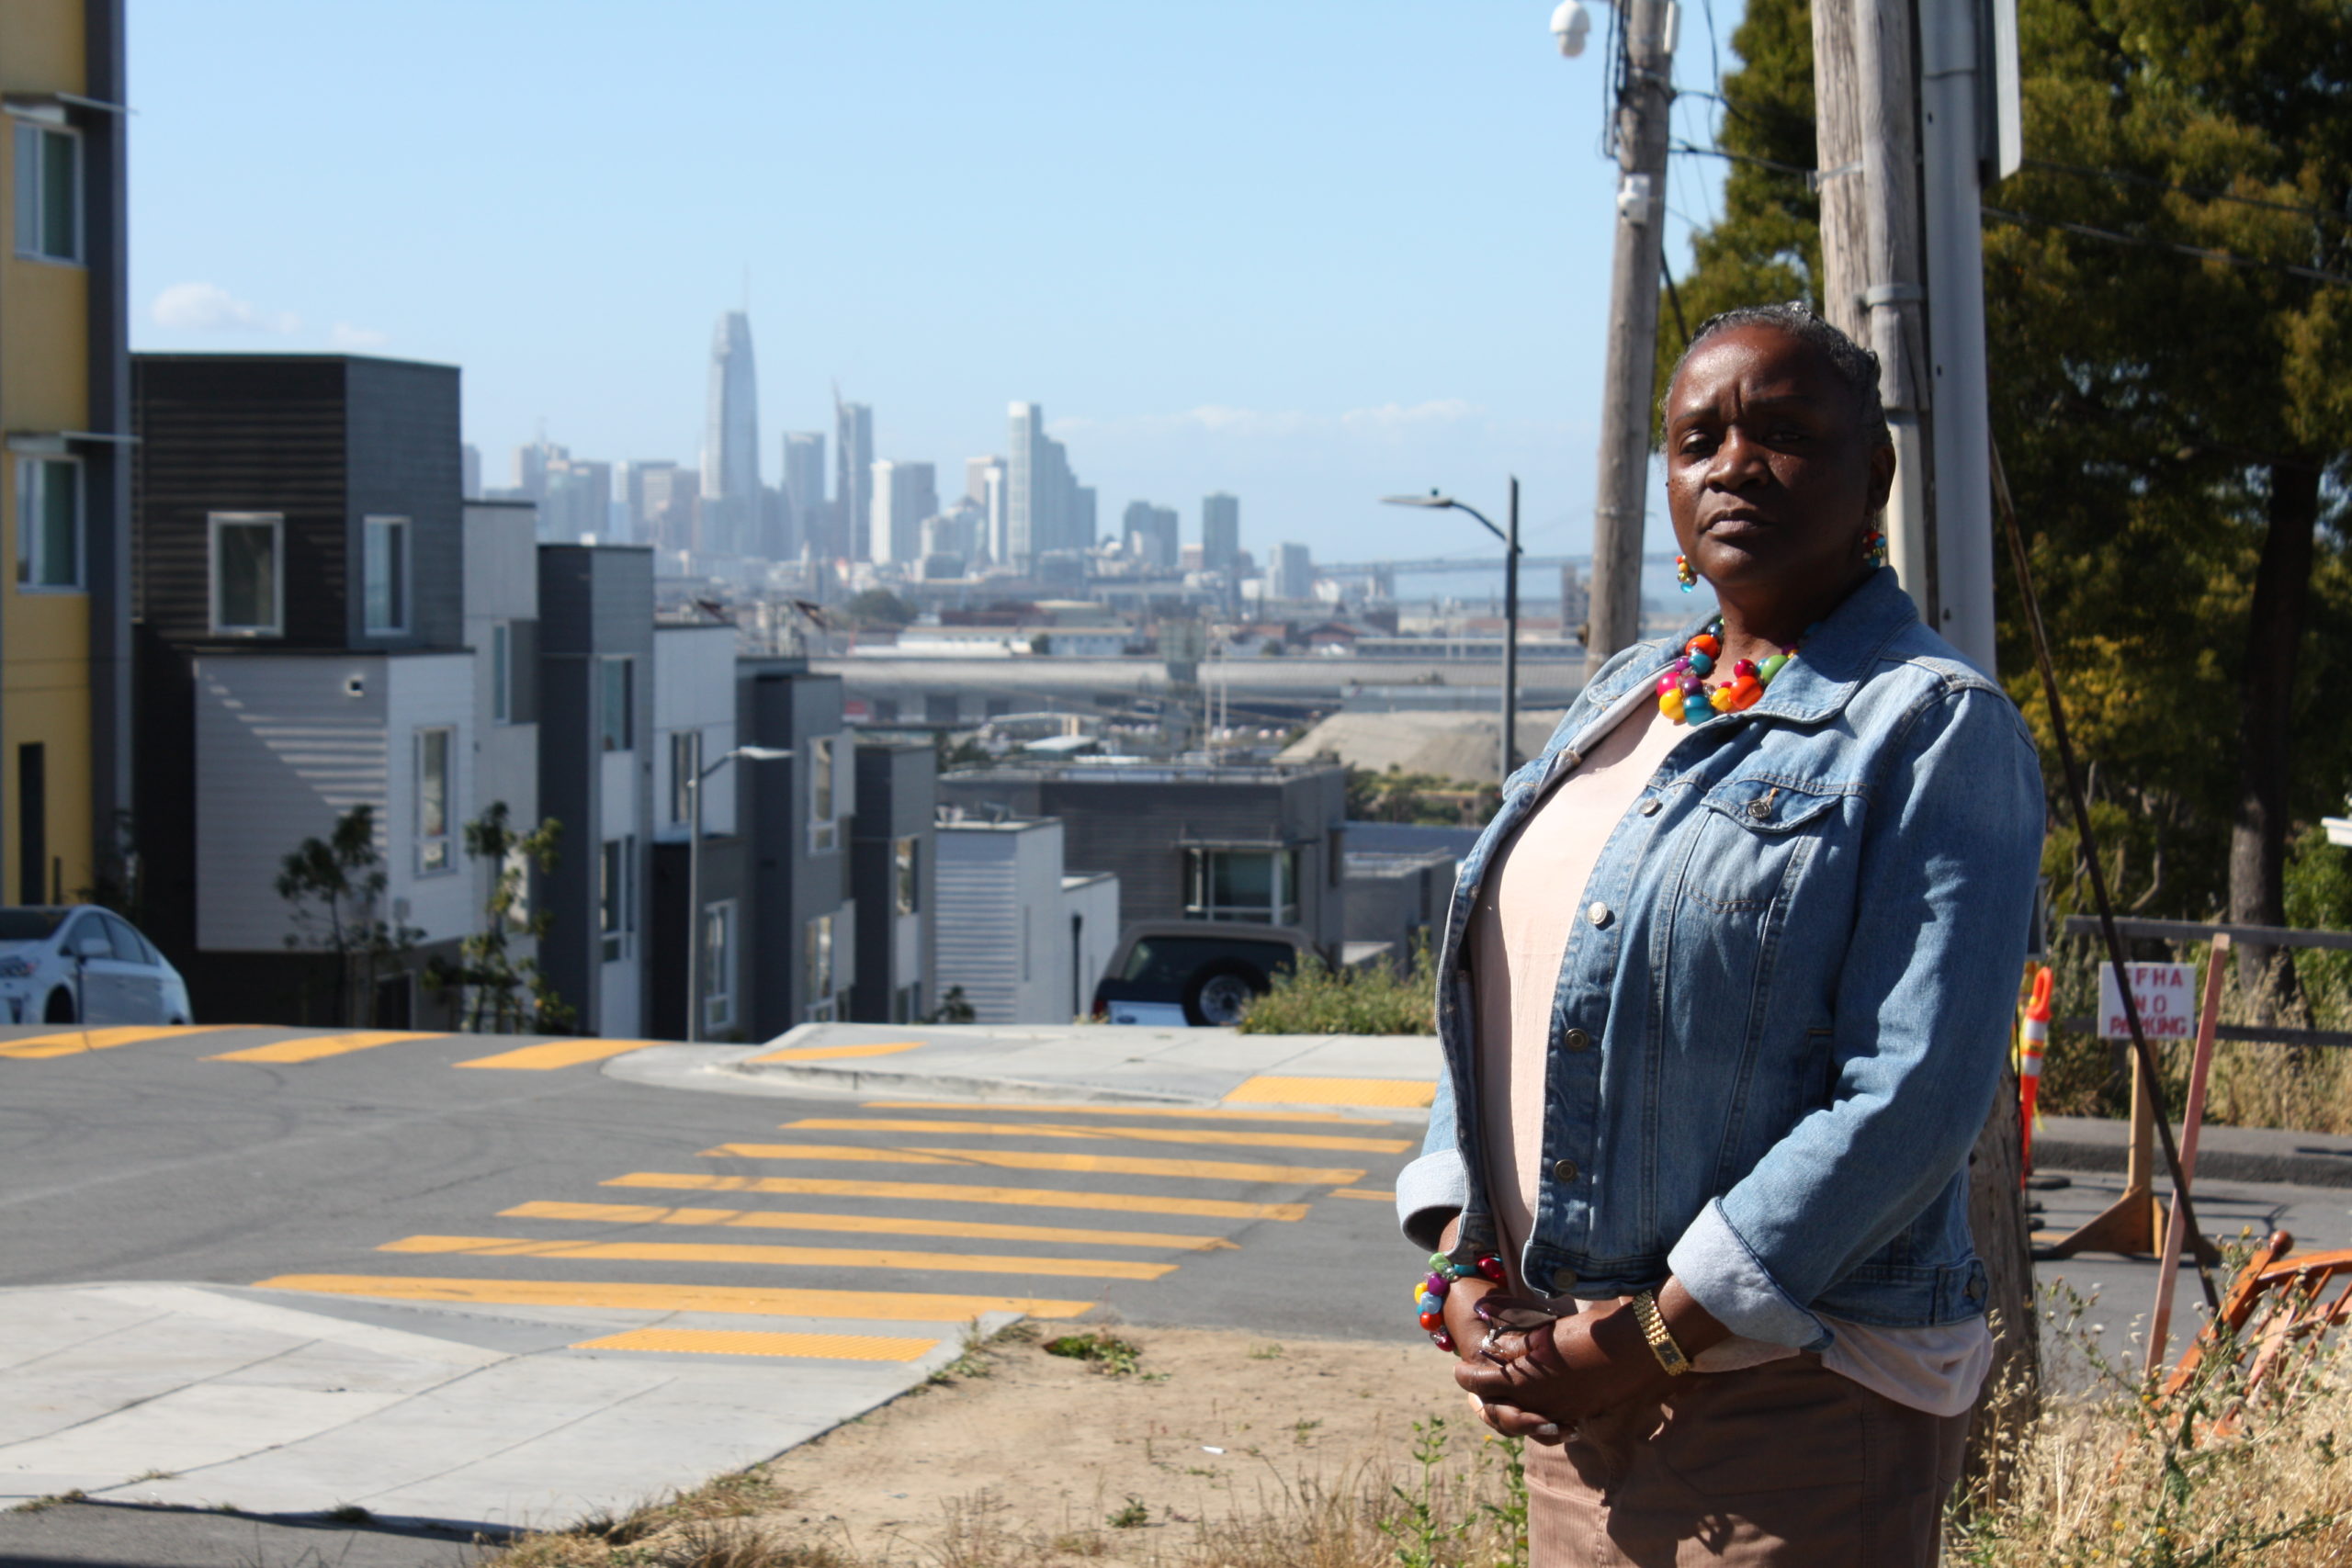 The 200-Foot Journey: Why HOPE SF’s Housing Model Works